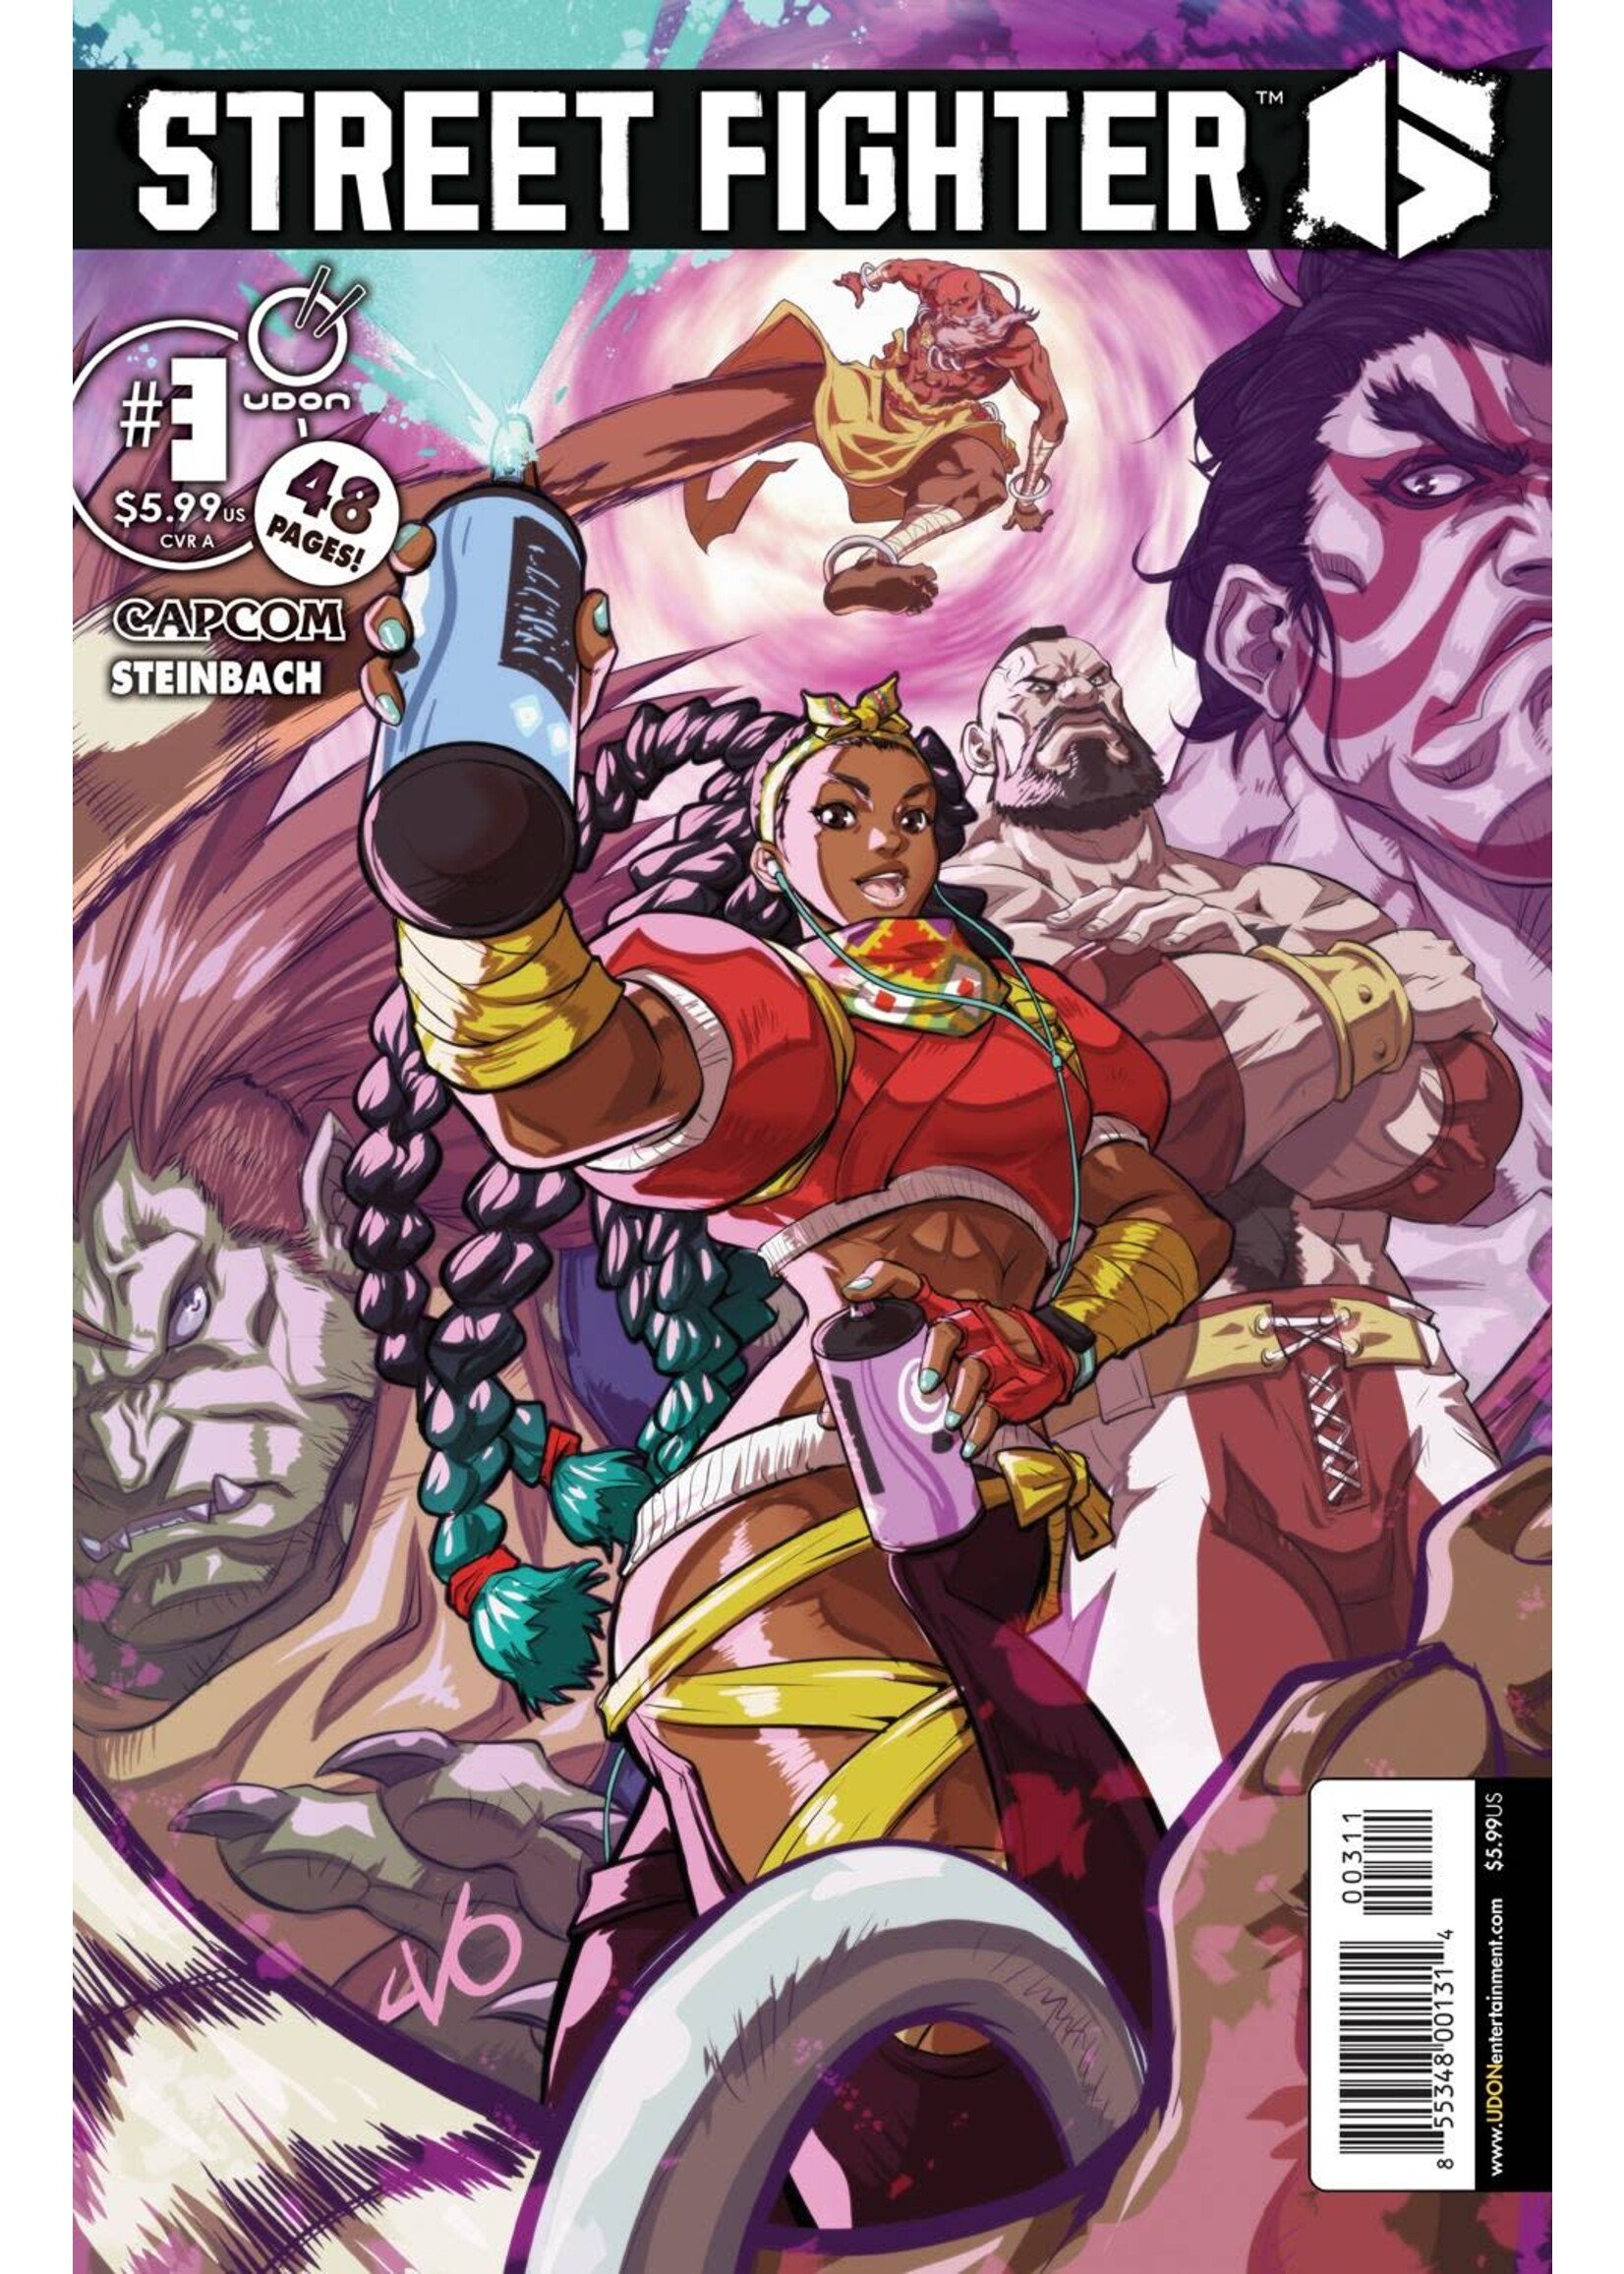 UDON ENTERTAINMENT INC STREET FIGHTER 6 #3 (OF 4) CVR A VO